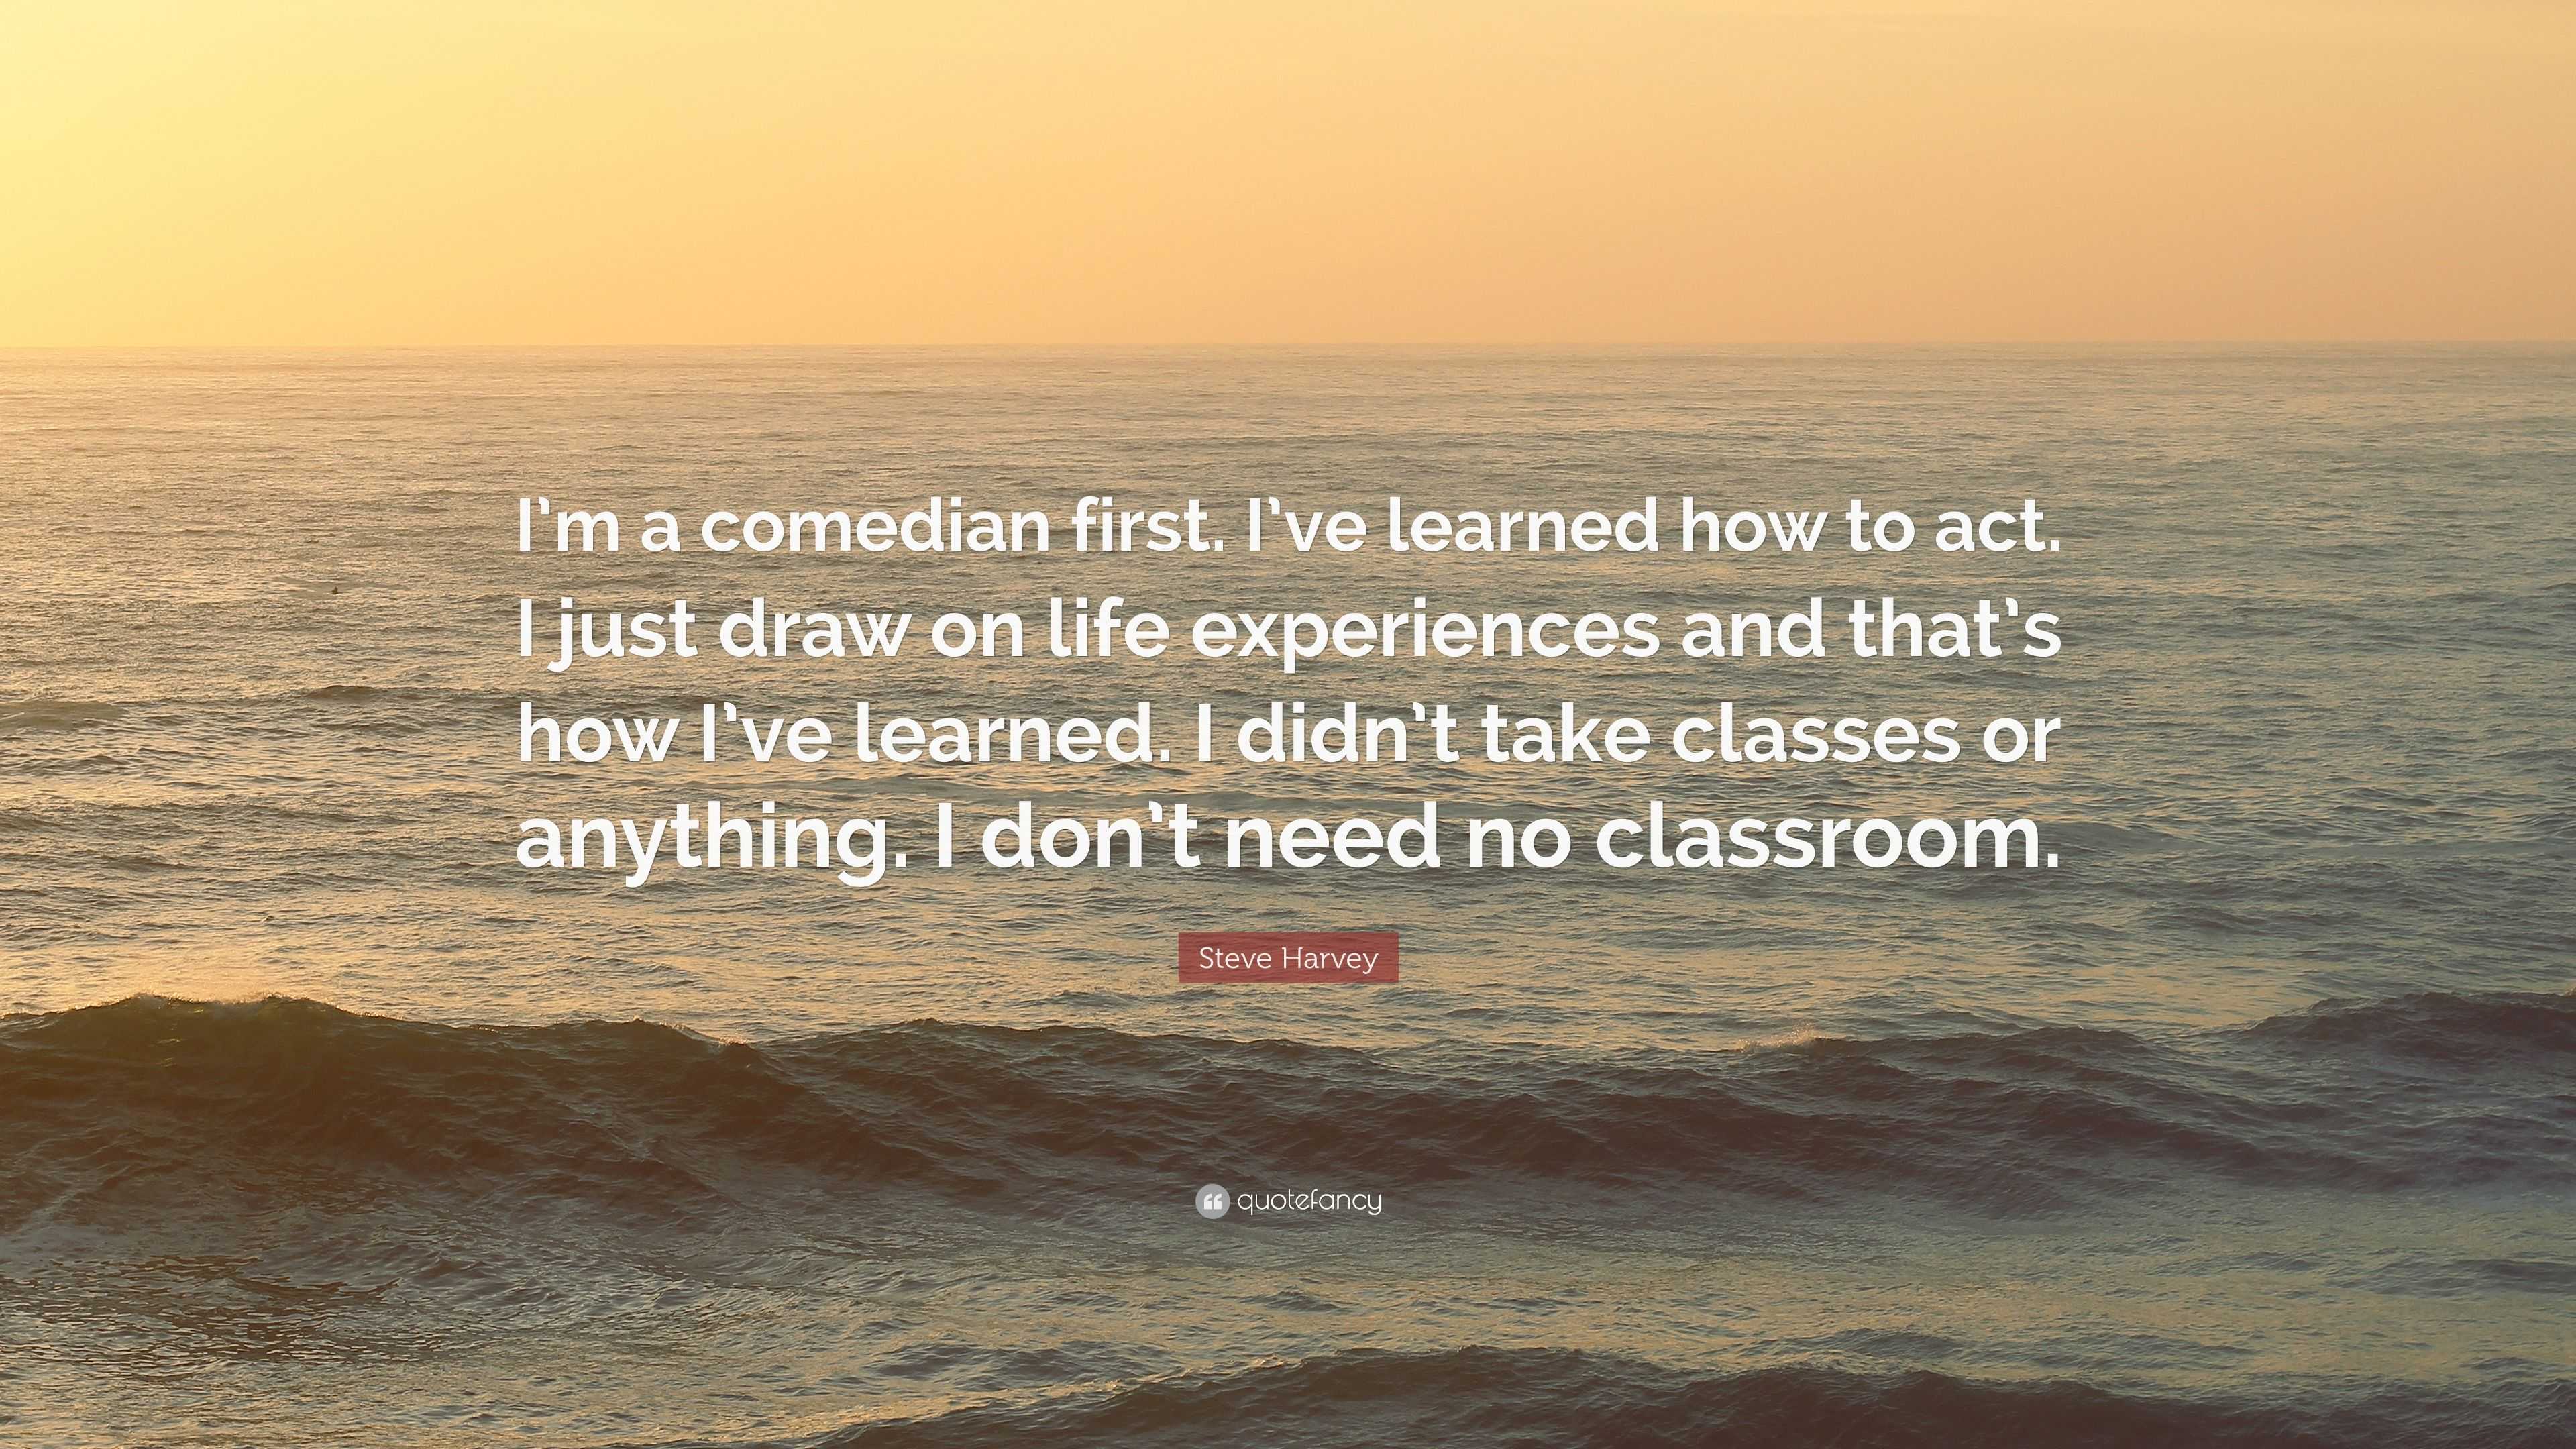 Steve Harvey Quote: "I'm a comedian first. I've learned ...